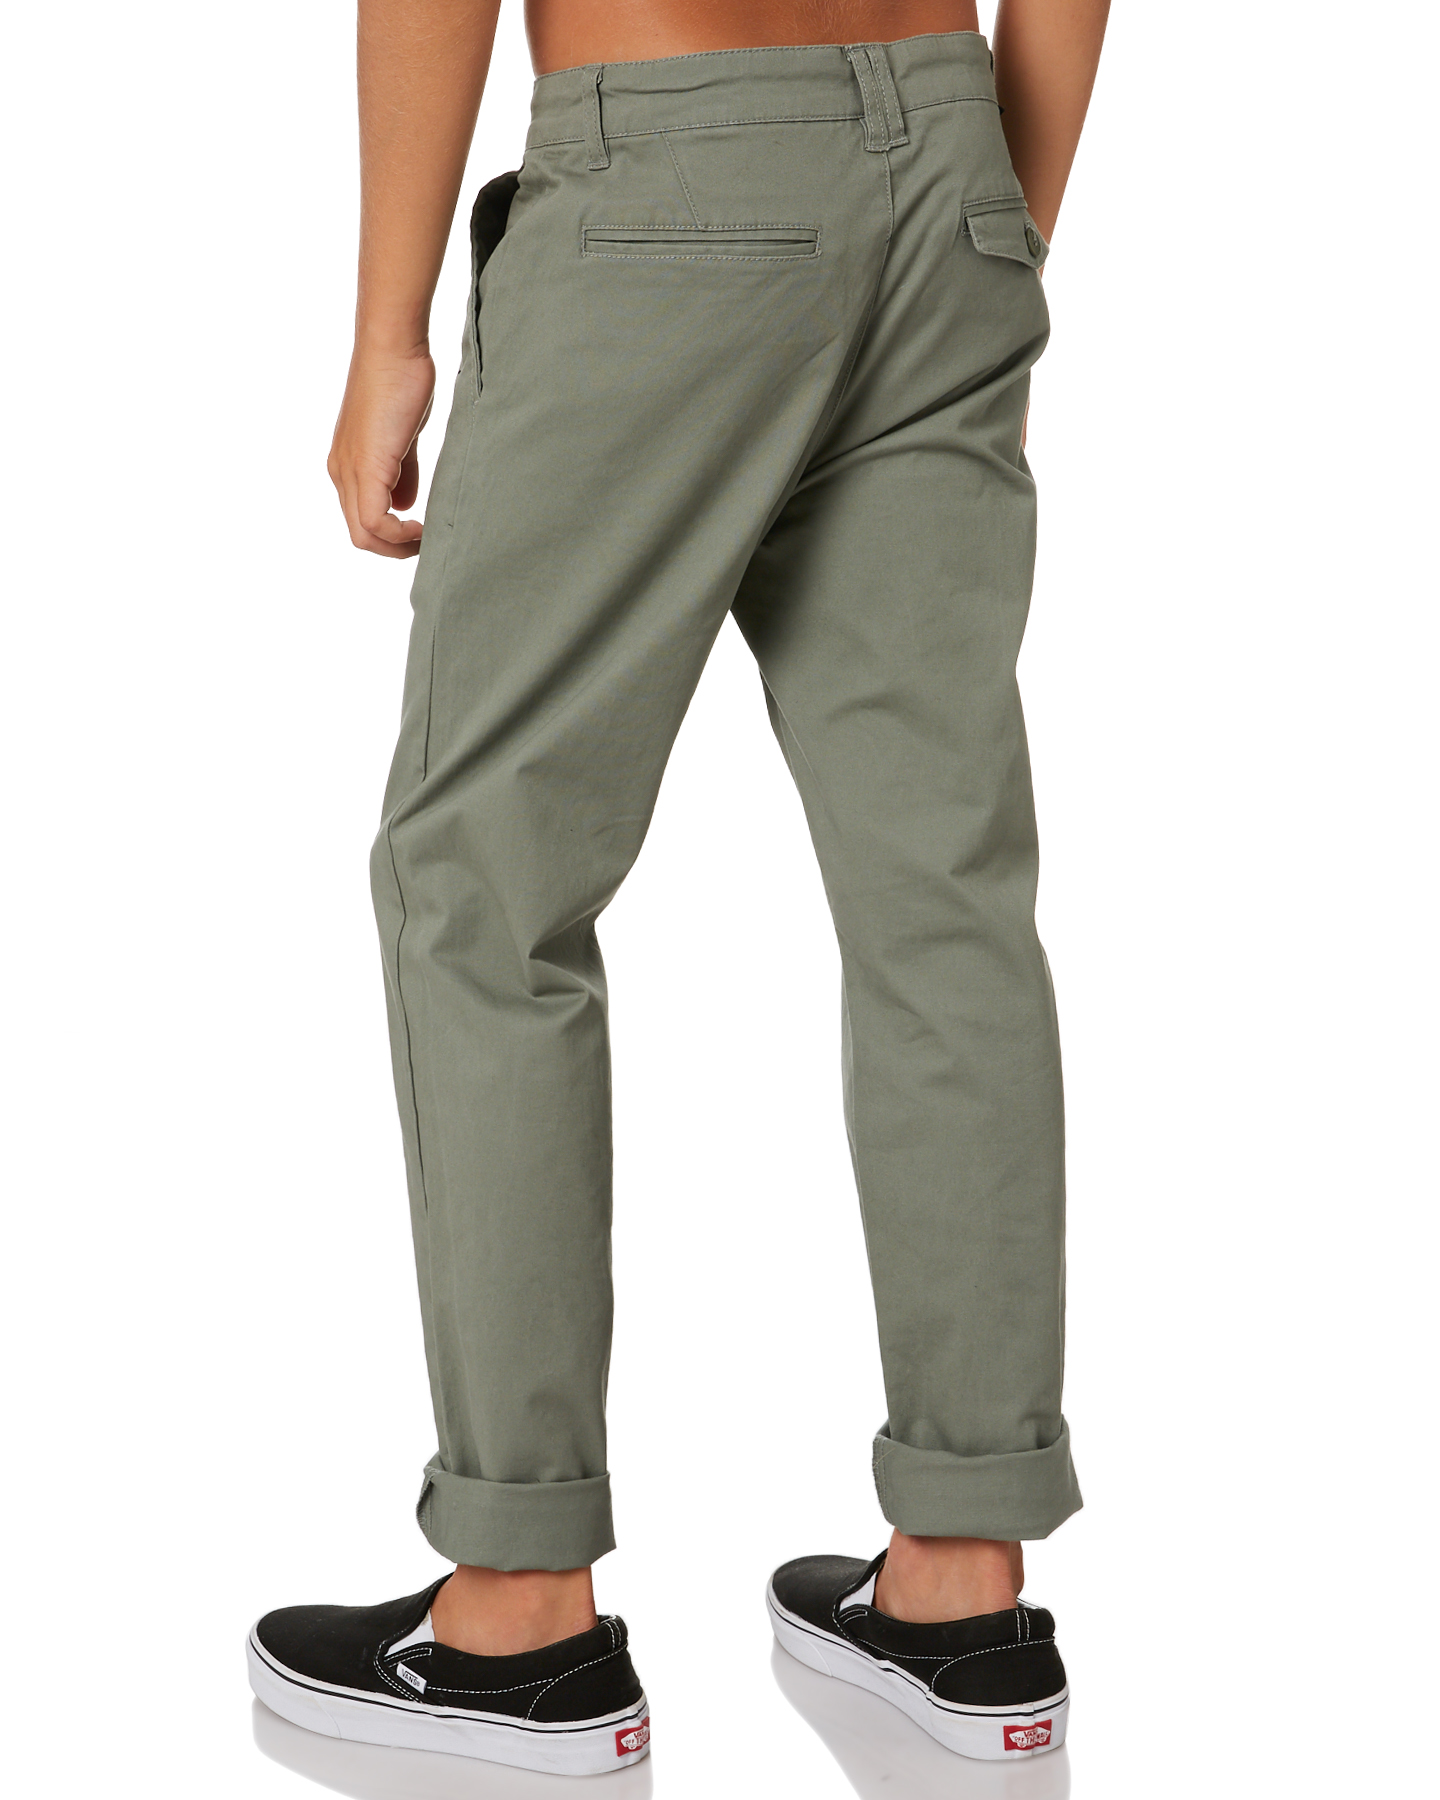 Swell Boys Tempest Chino Pant - Teens - Military | SurfStitch